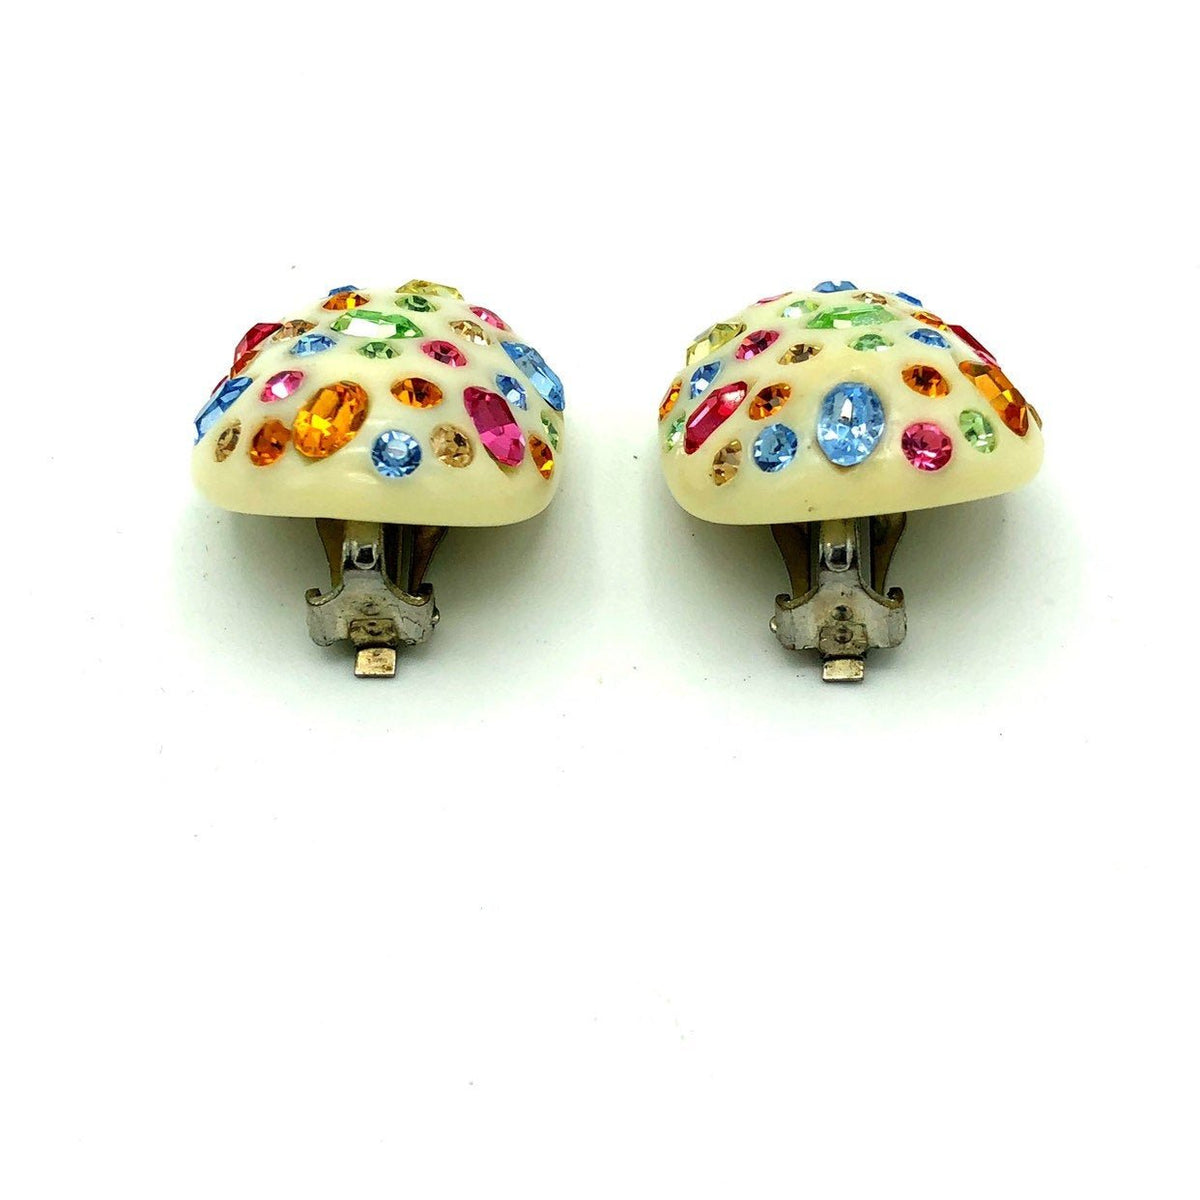 Weiss White Thermoset & Multi-Color Rhinestone Round Vintage Earrings - 24 Wishes Vintage Jewelry